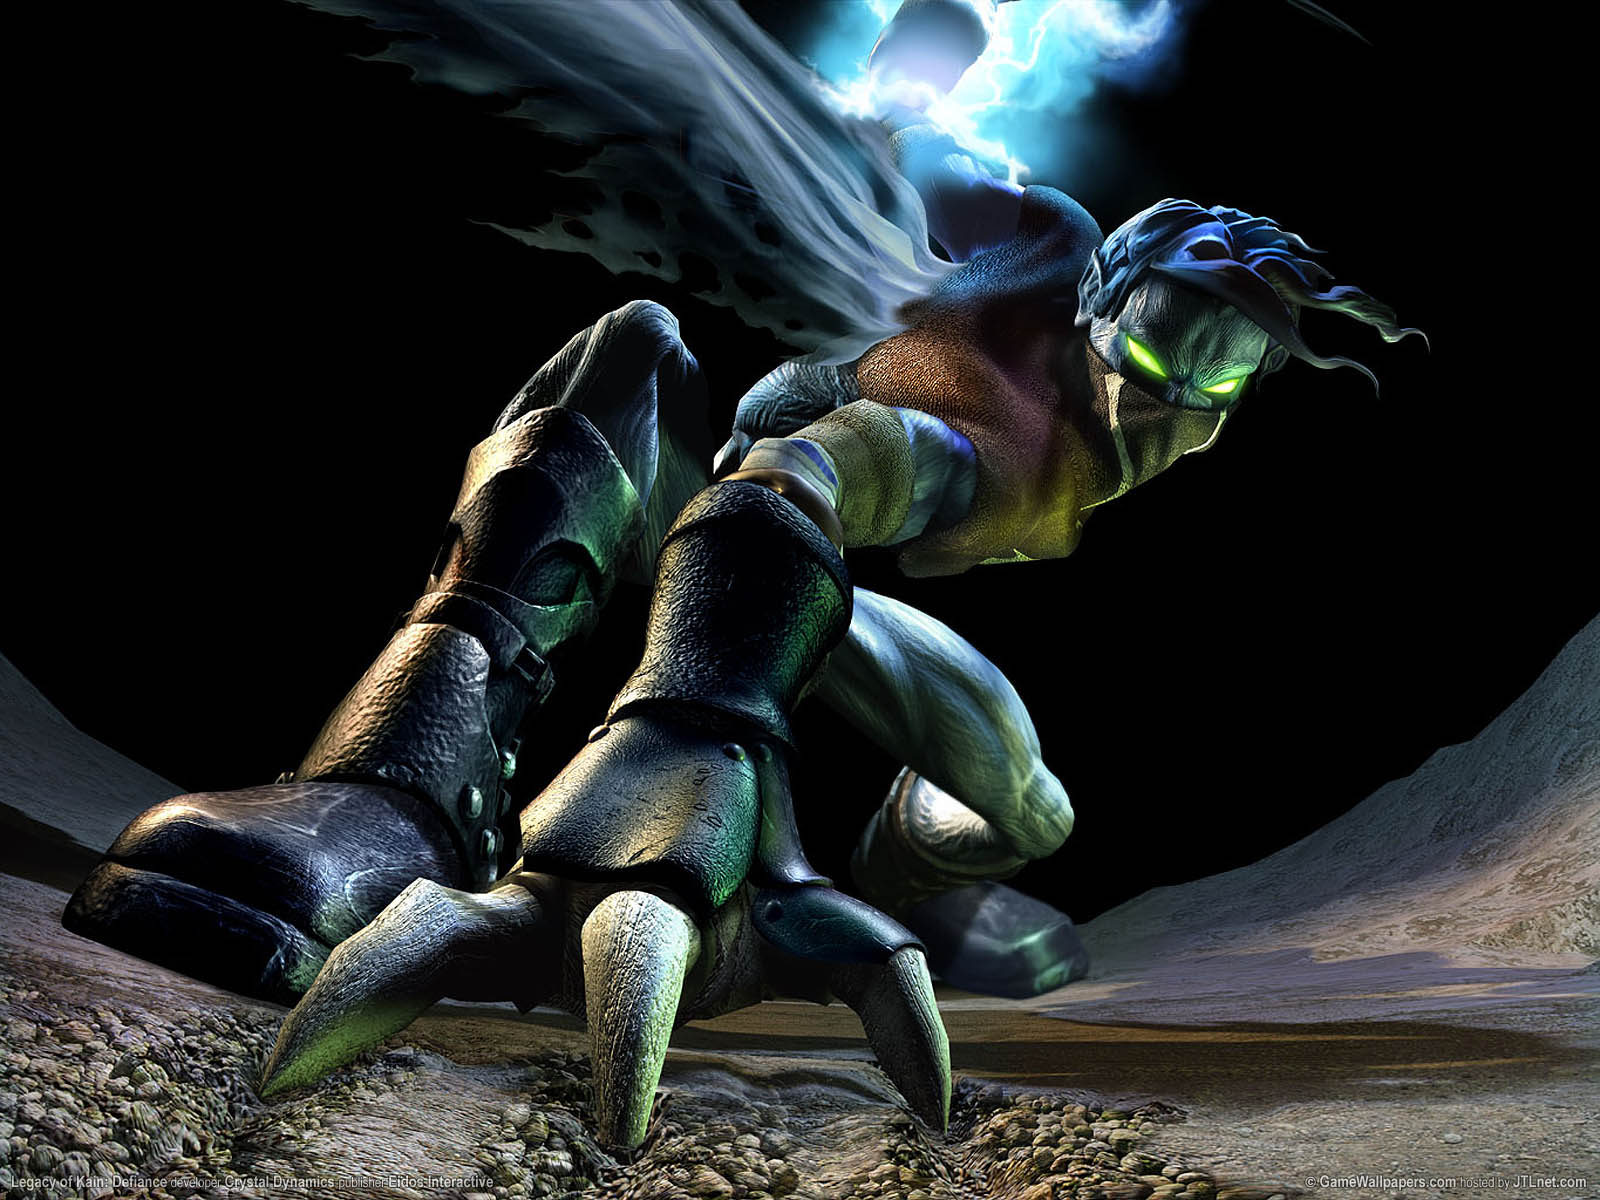 Legacy of Kain%2525253A Defiance wallpaper 03 1600x1200